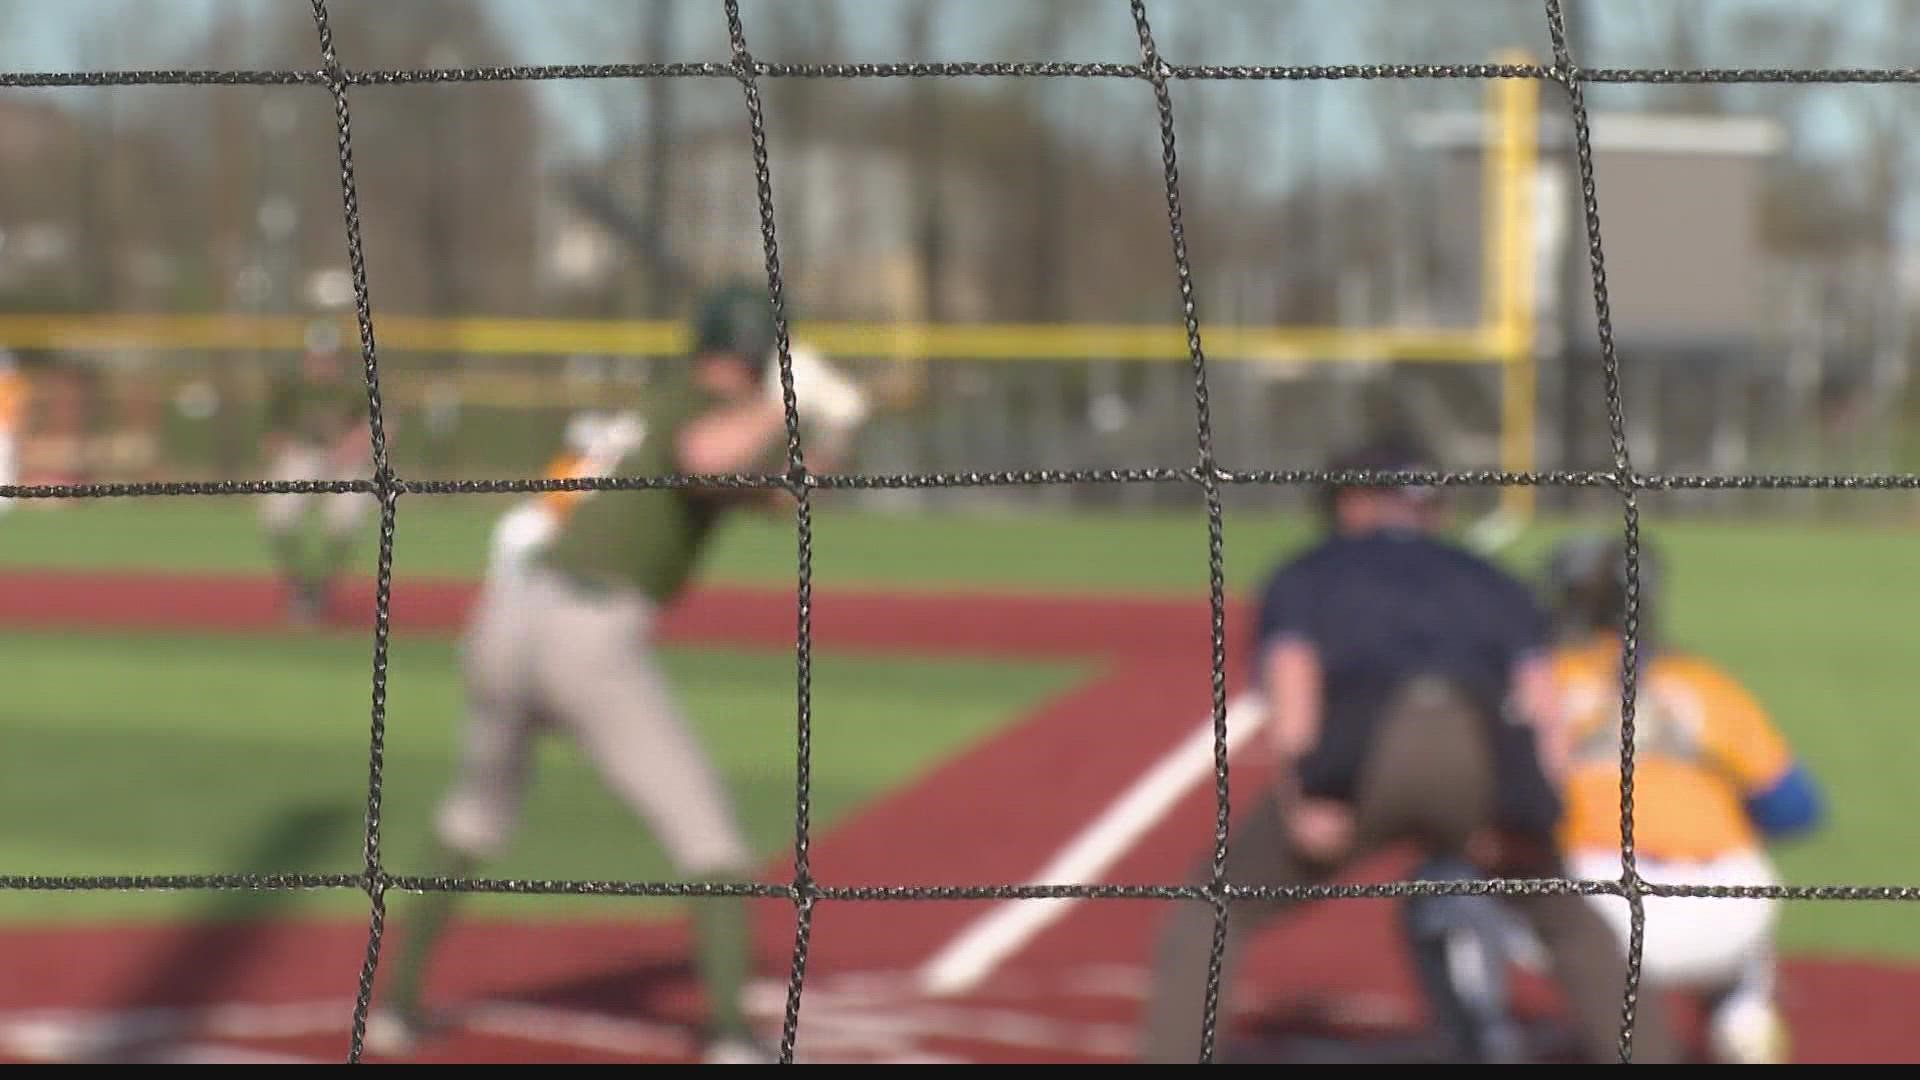 It's an ongoing issue impacting youth sports leagues across the state.